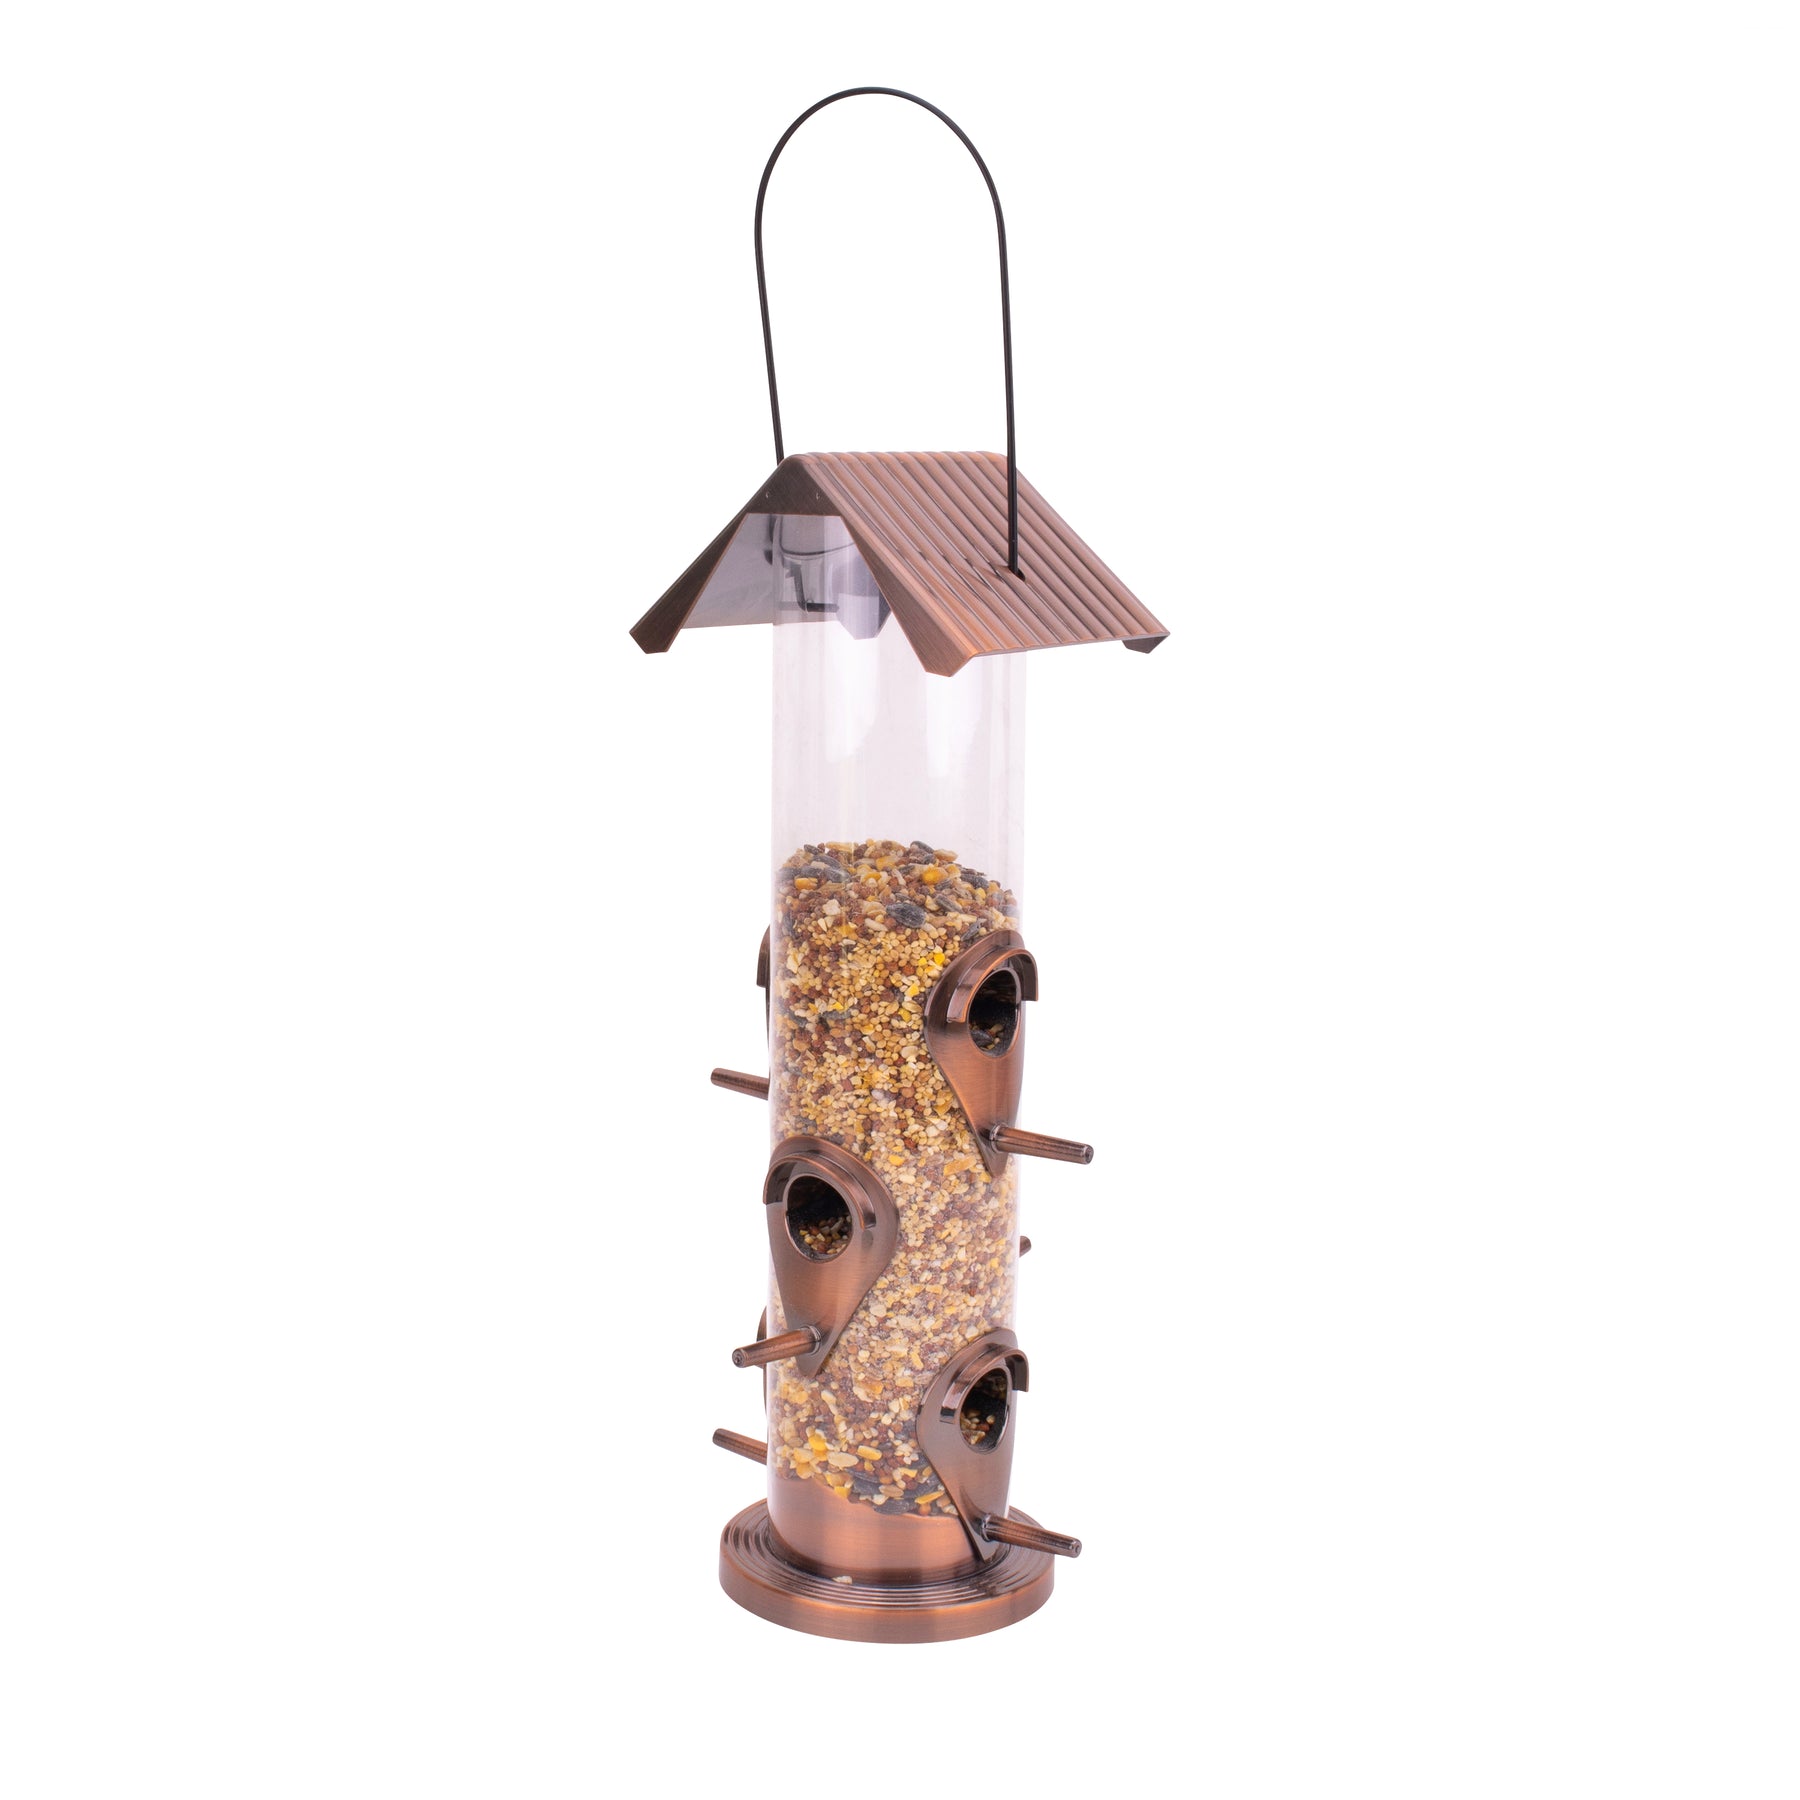 Bliss Outdoors 6-Port Bird Feeder with a copper base, perches, and lid filled with bird seed.